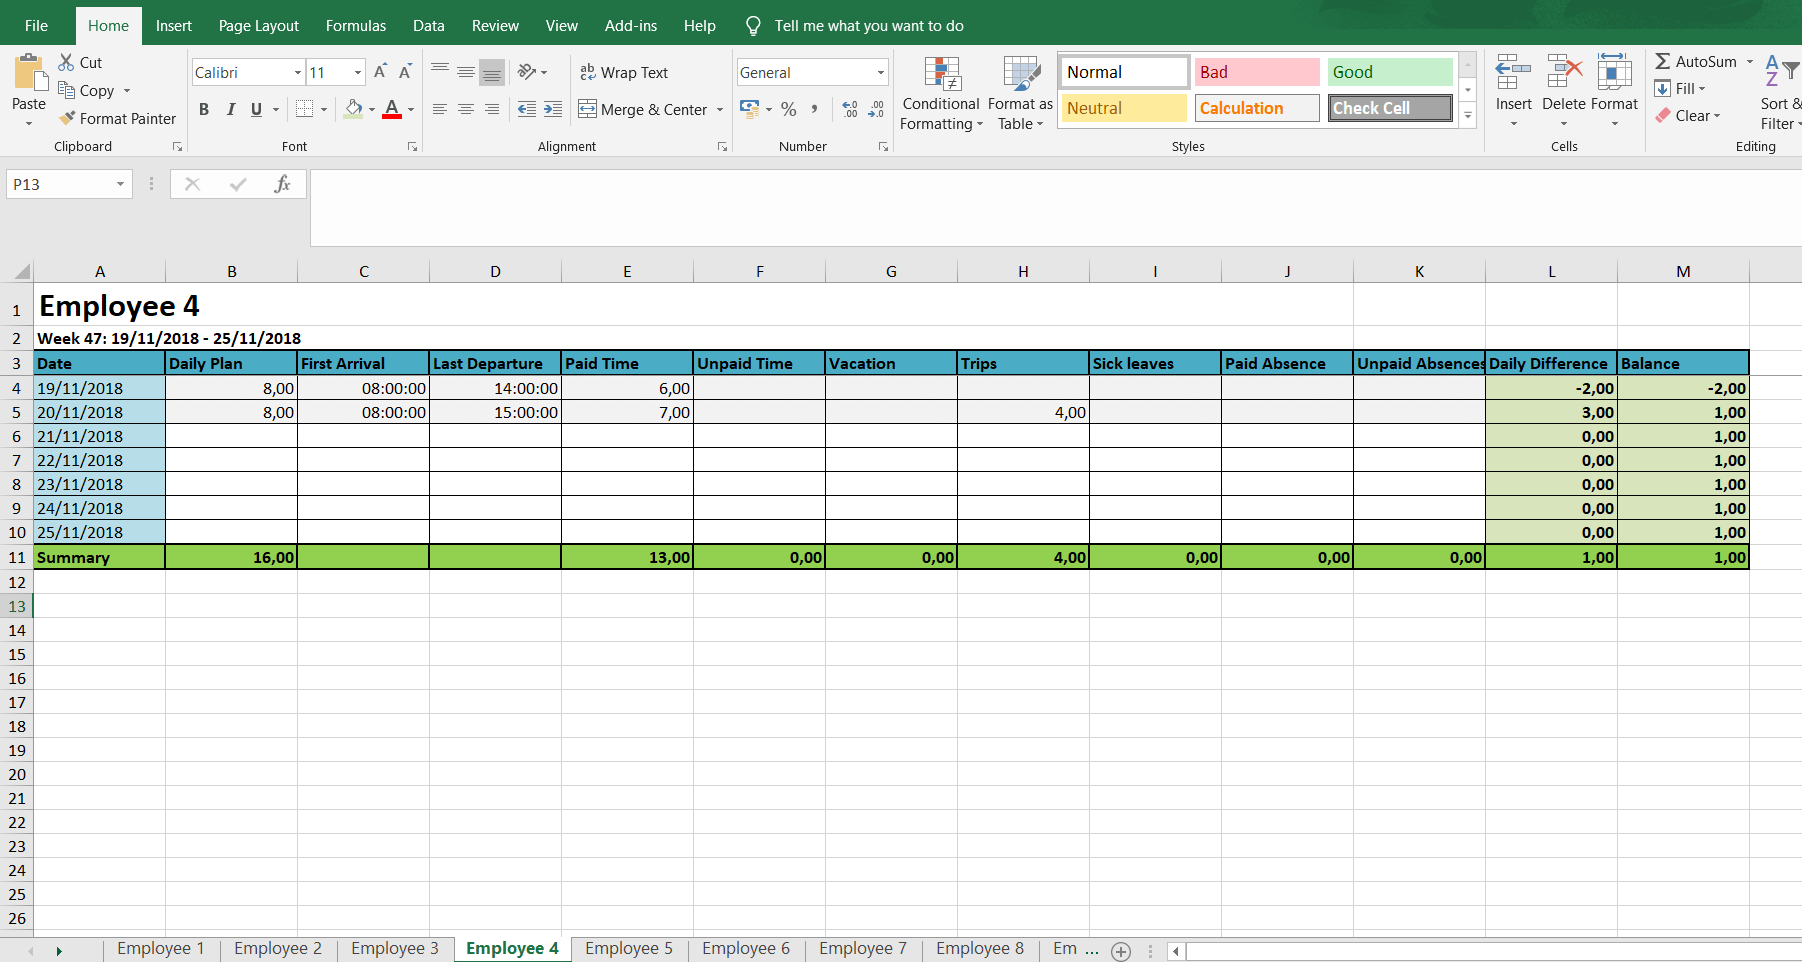 Excel Time Tracking Sheet Template from allhours.com